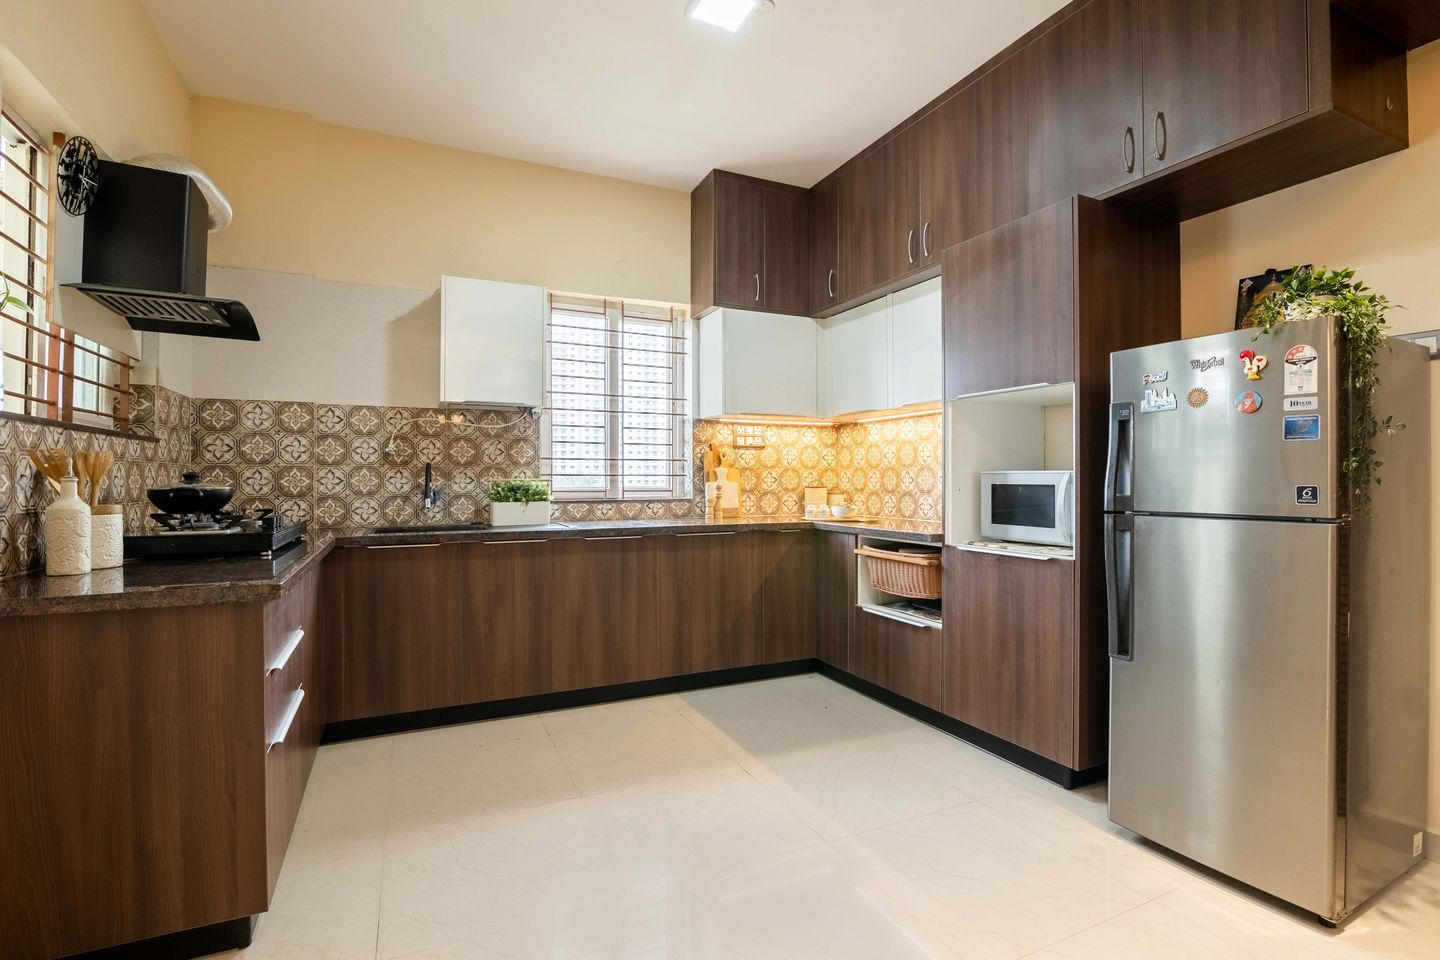 Contemporary U-Shaped Kitchen Design with Pacific B and Frosty White Cabinets